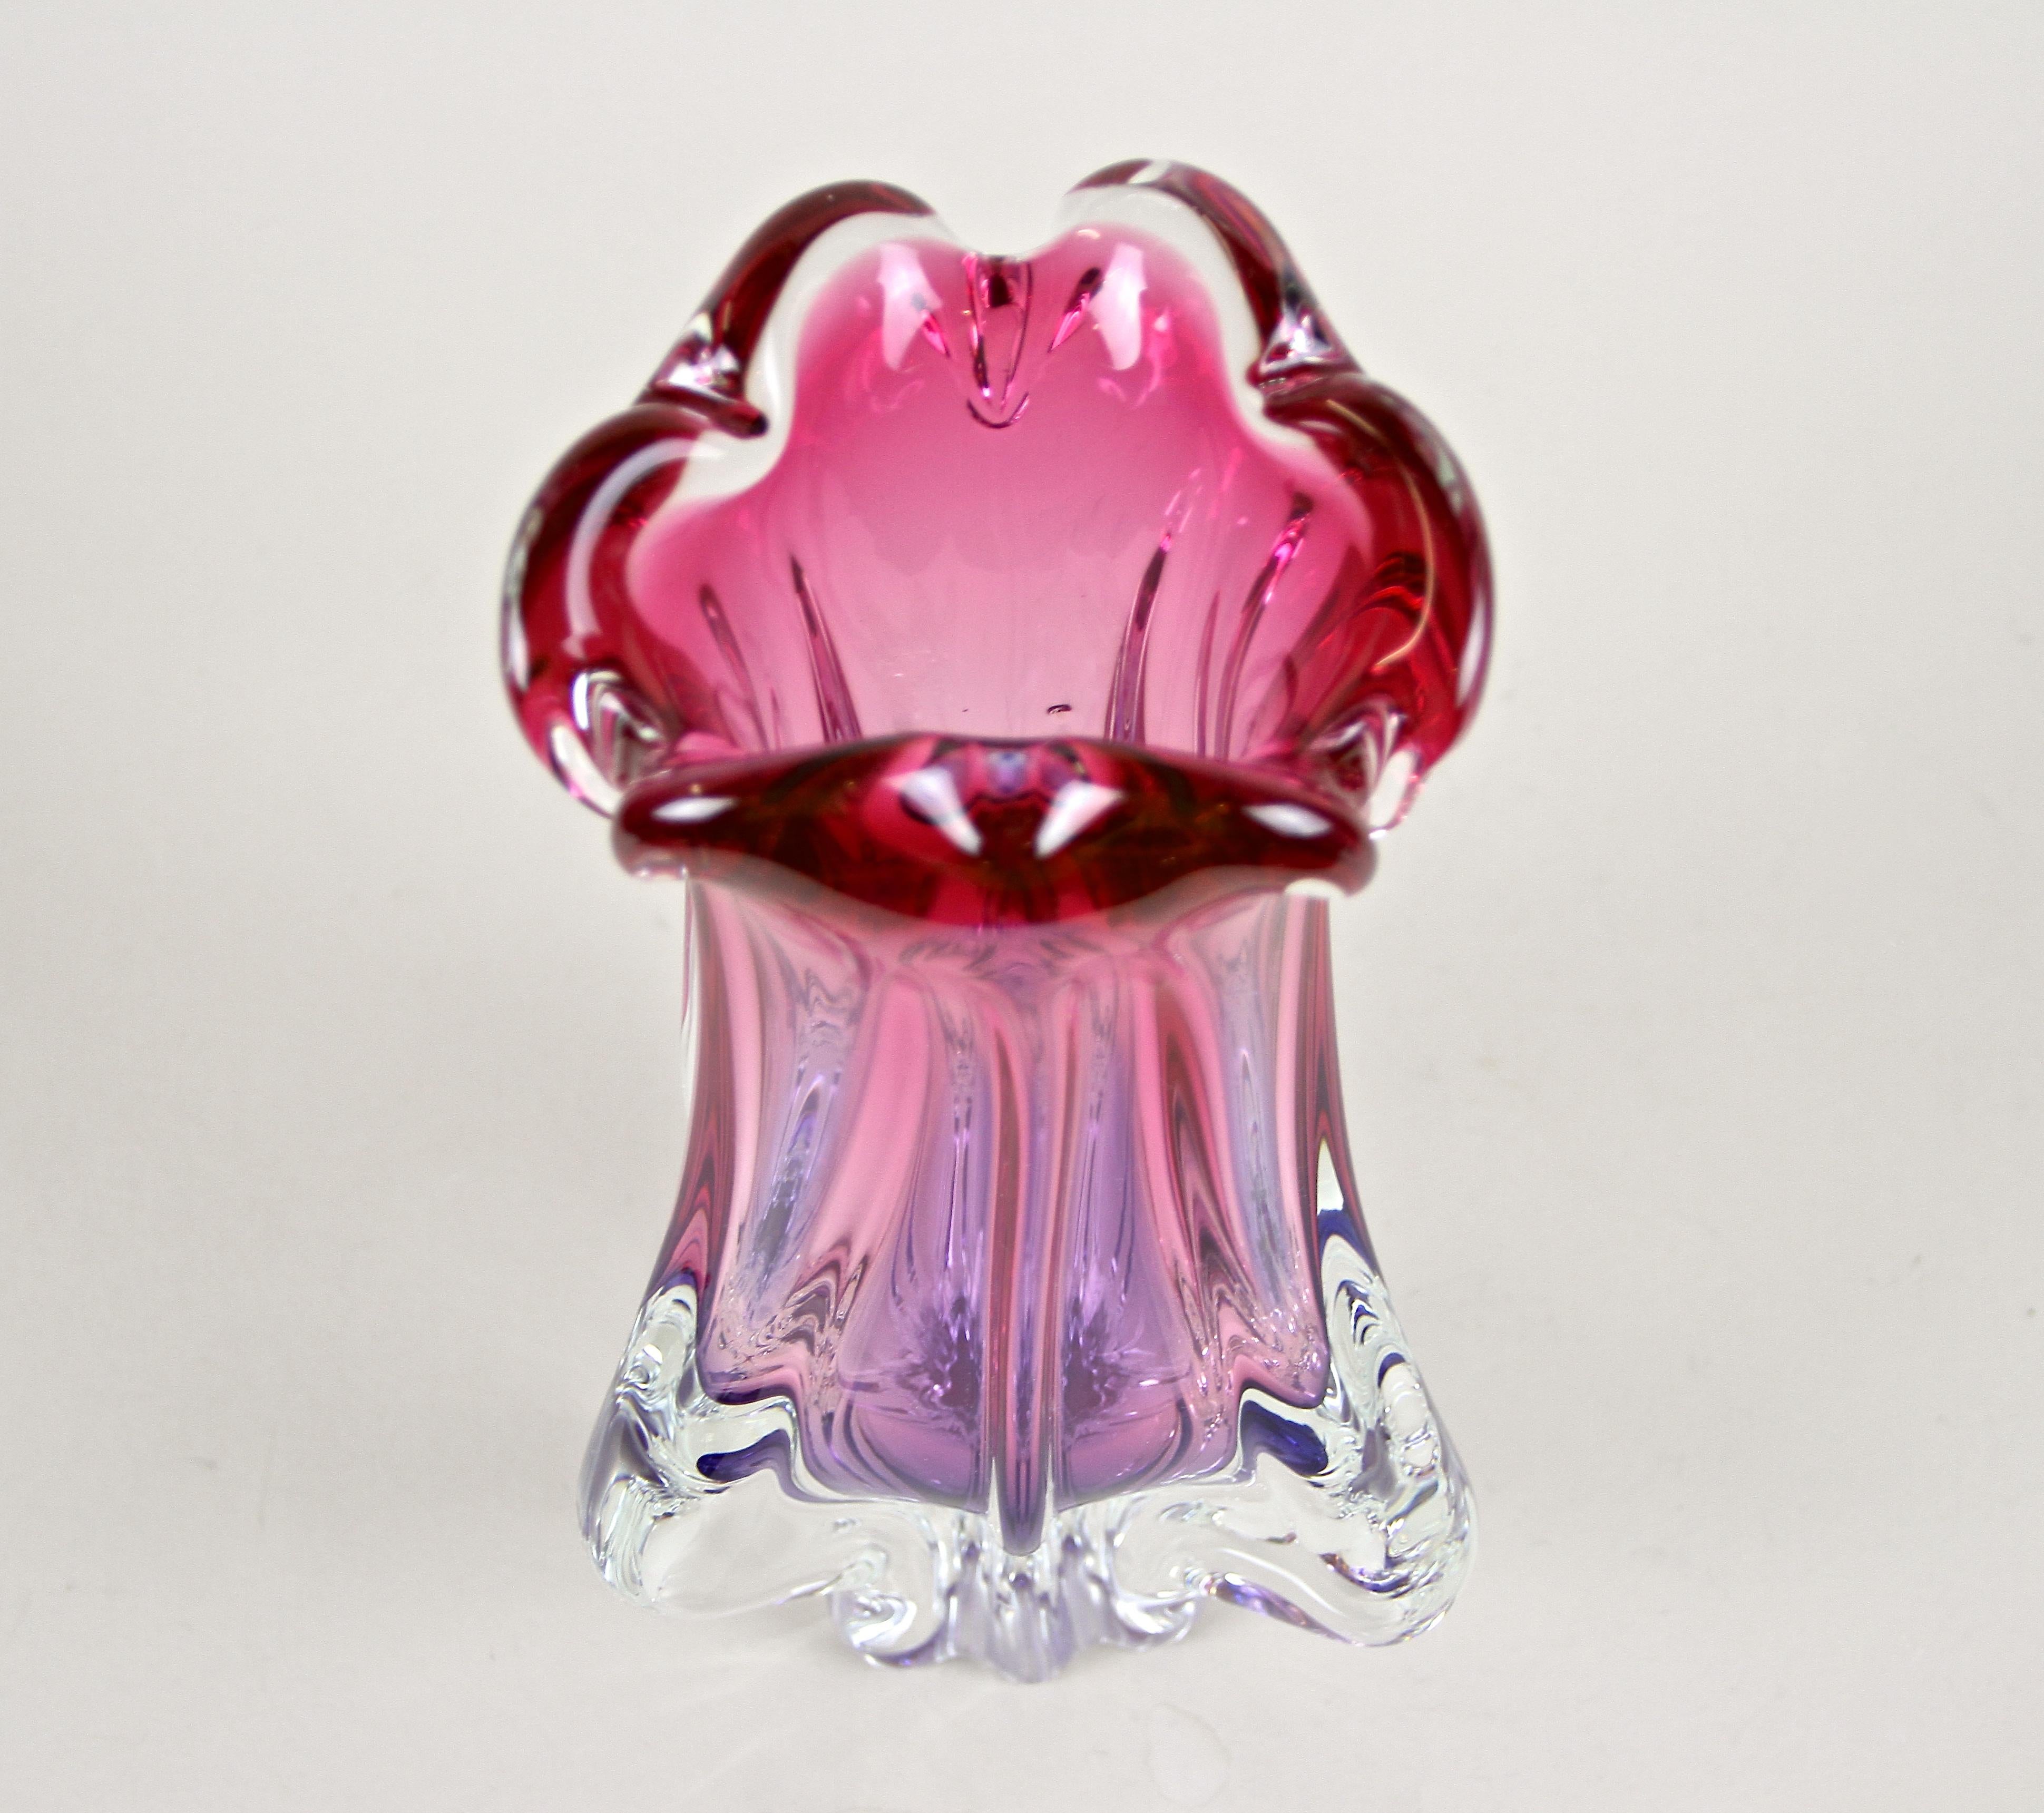 Mid-Century Murano Vase by Sommerso Murano, Italy circa 1960/70 For Sale 10